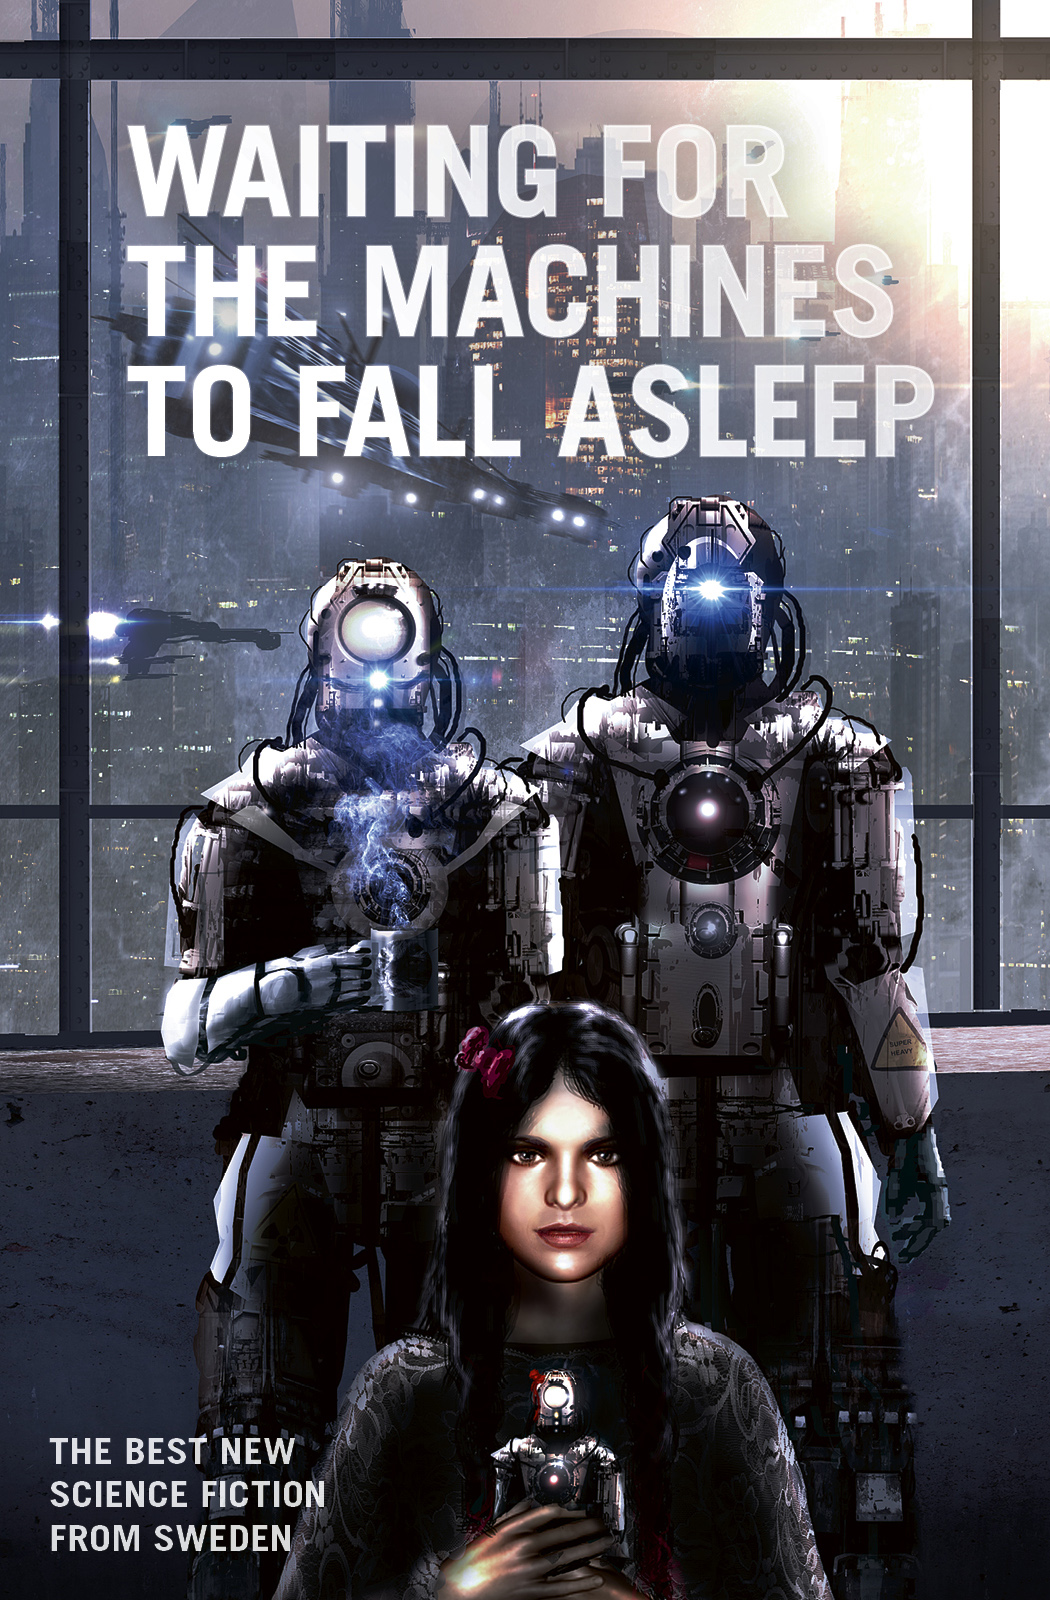 Waiting for the Machines to Fall Asleep